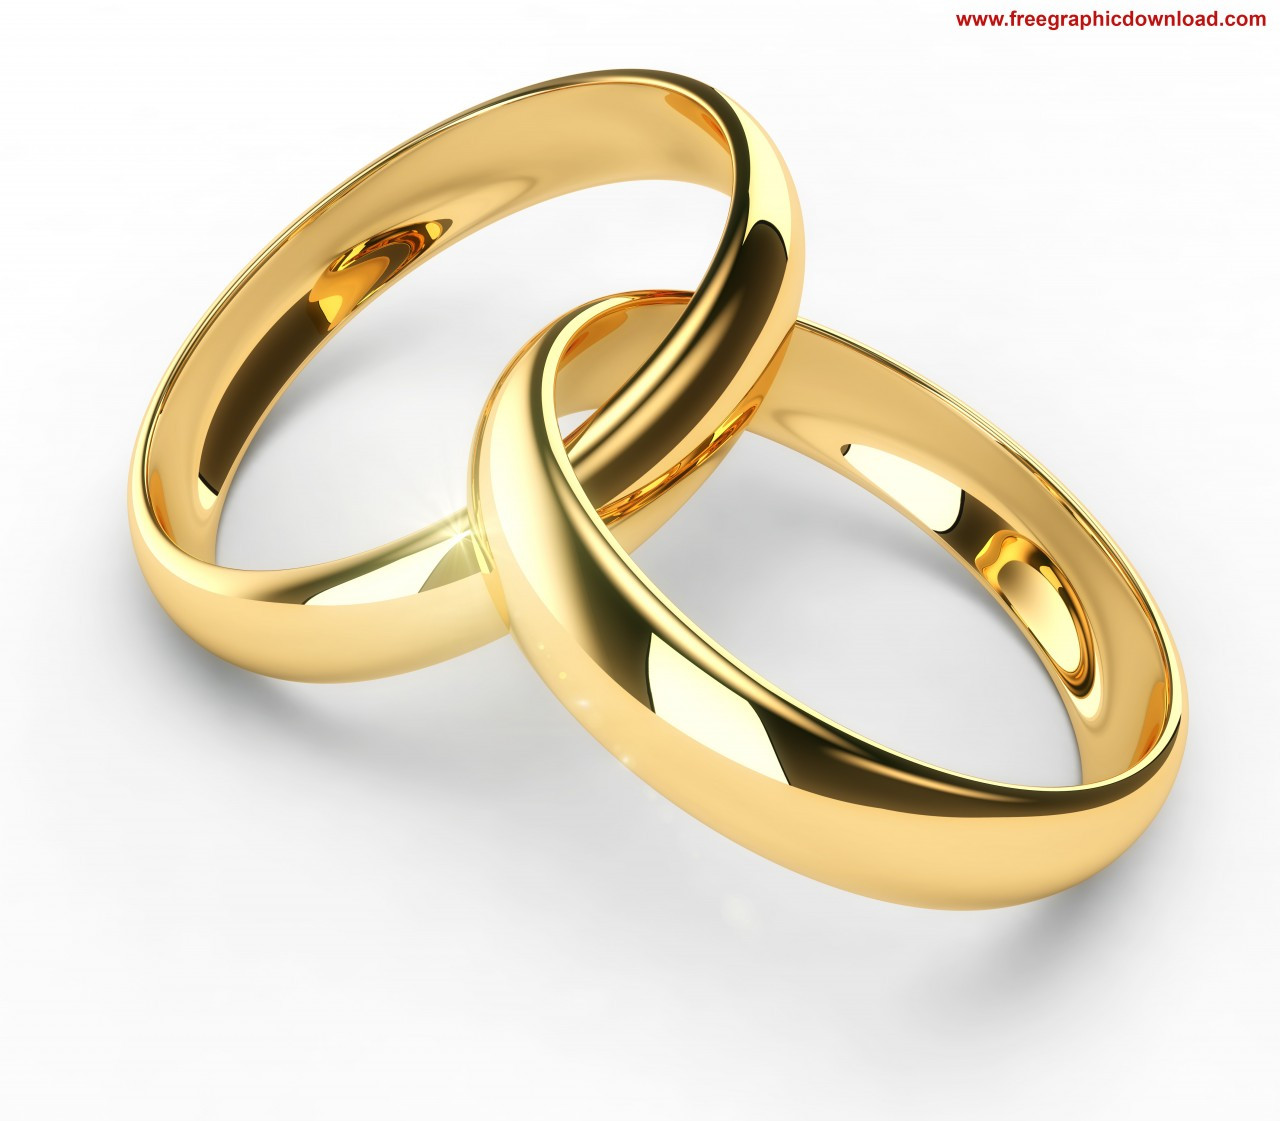 Wedding Rings Clip Art
 Best Wedding Ring Clipart Clipartion